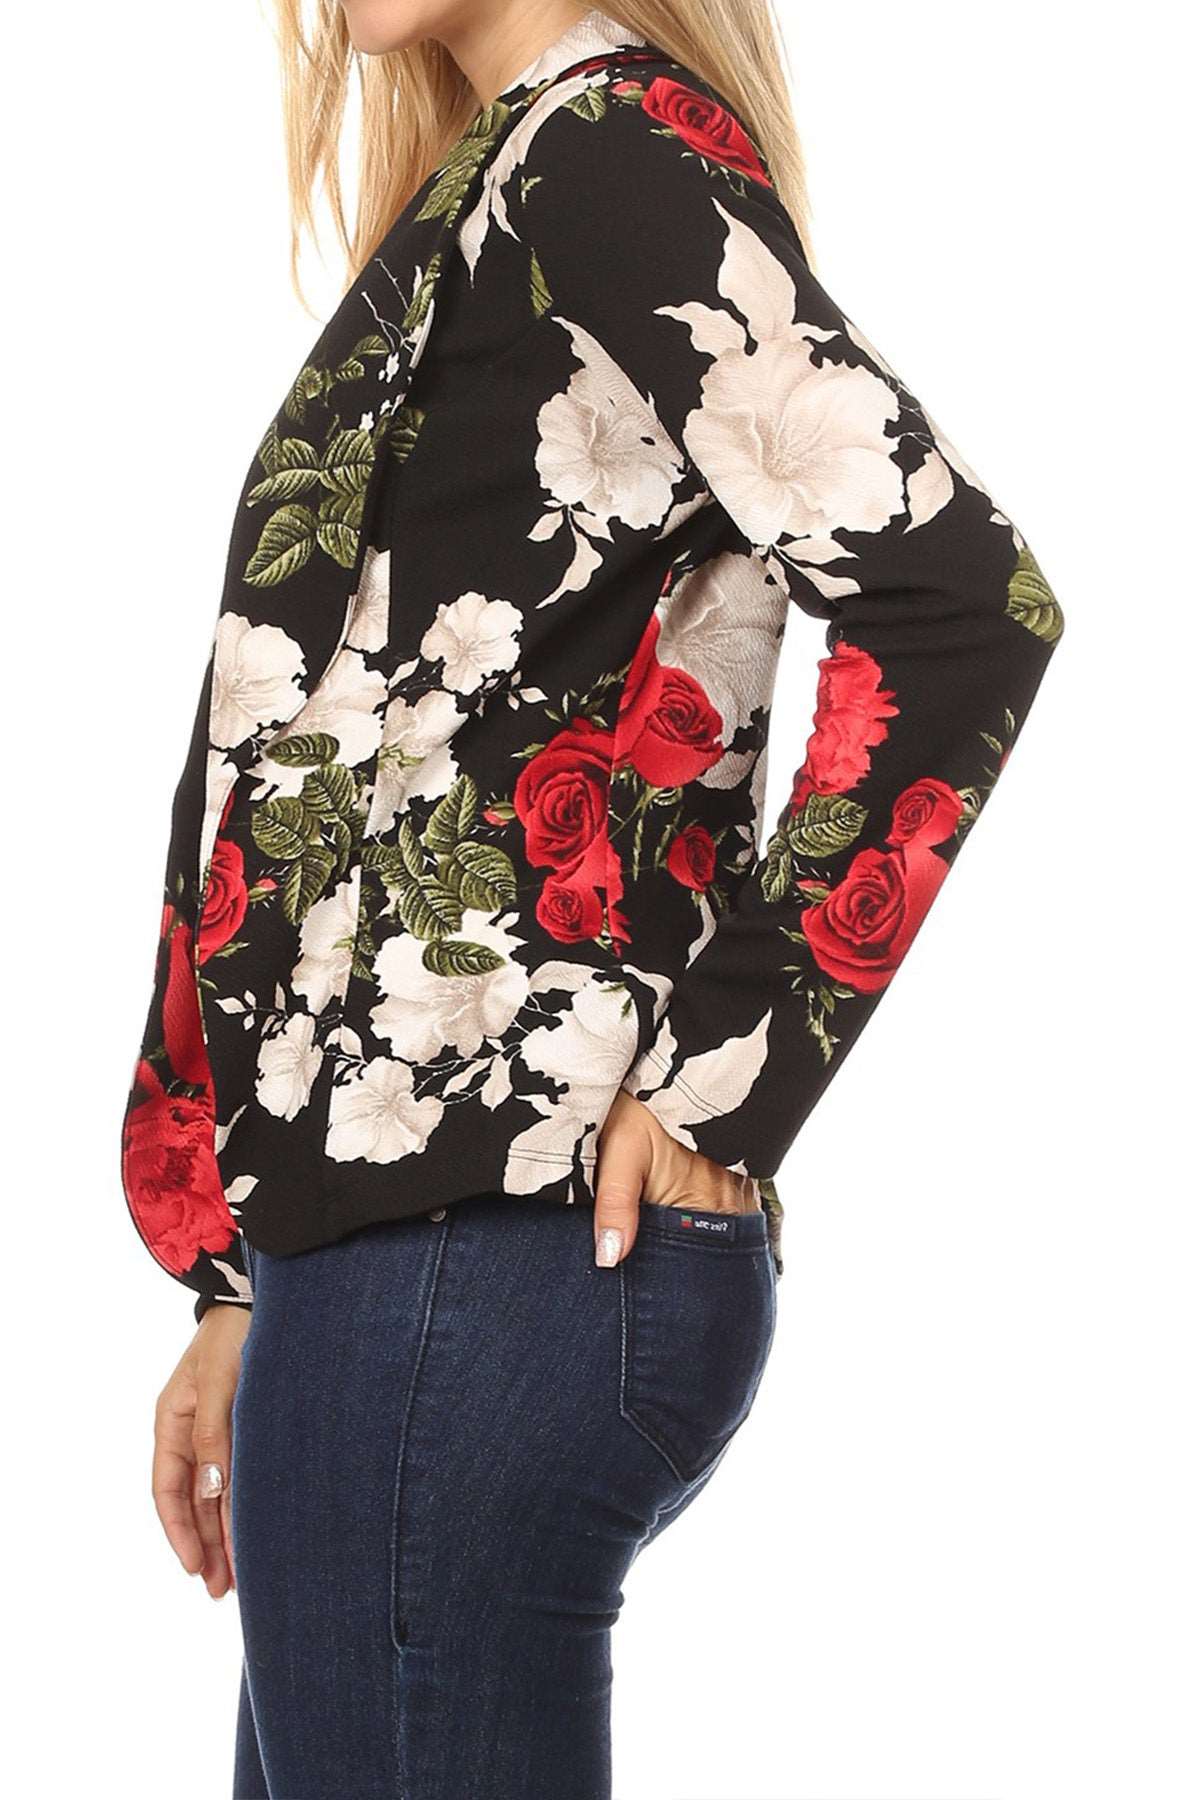 Women's Casual Pattern Print Fitted Open Front Long Sleeves Office Blazer Jacket